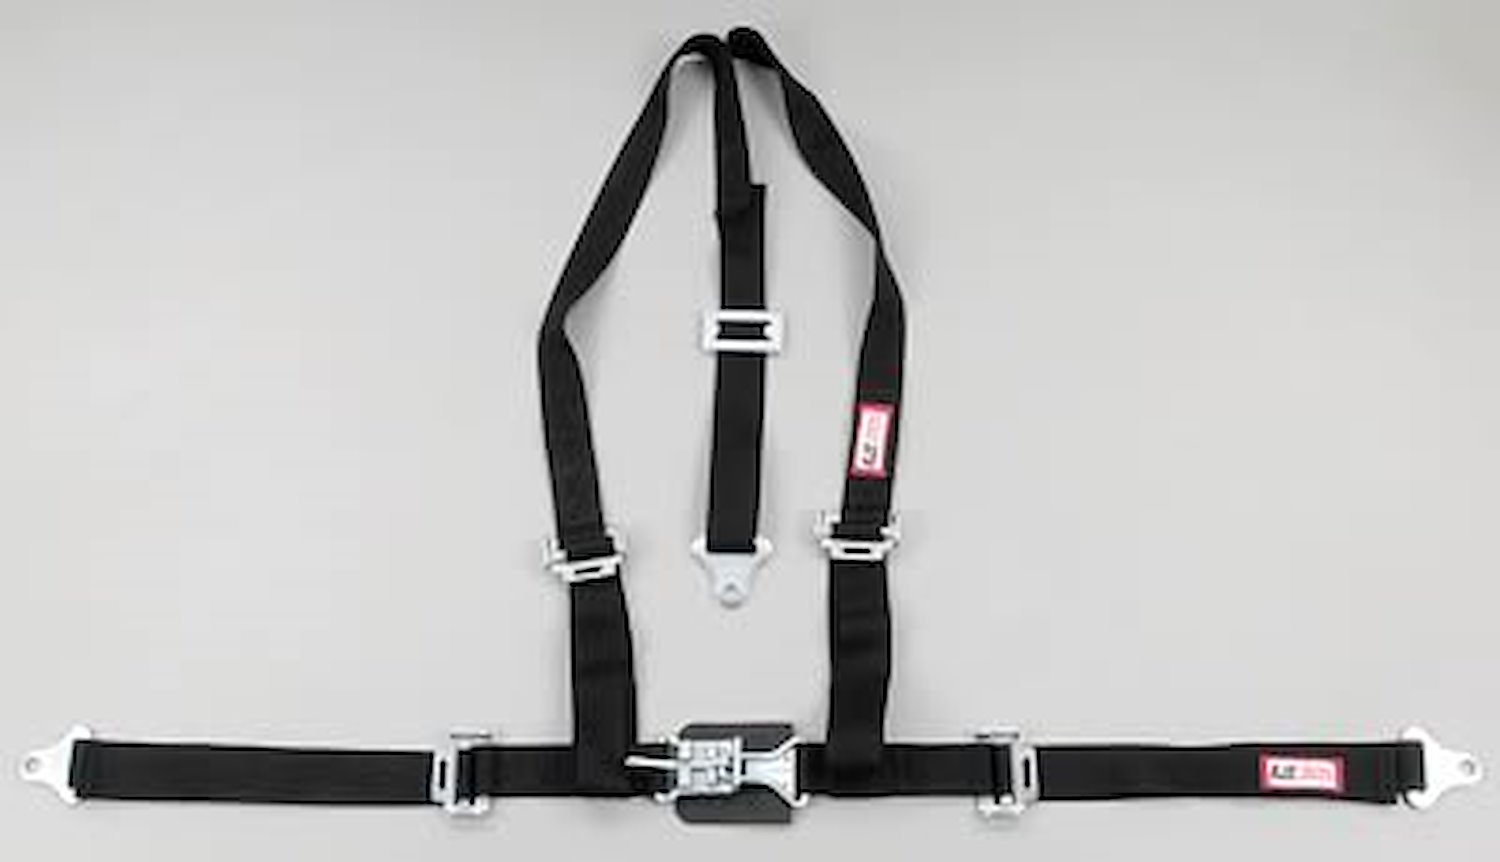 NON-SFI L&L HARNESS 3 PULL DOWN Lap BELT SNAP SEWN IN 2 S.H. Y FLOOR Mount w/STERNUM STRAP WRAP/SNAP YELLOW